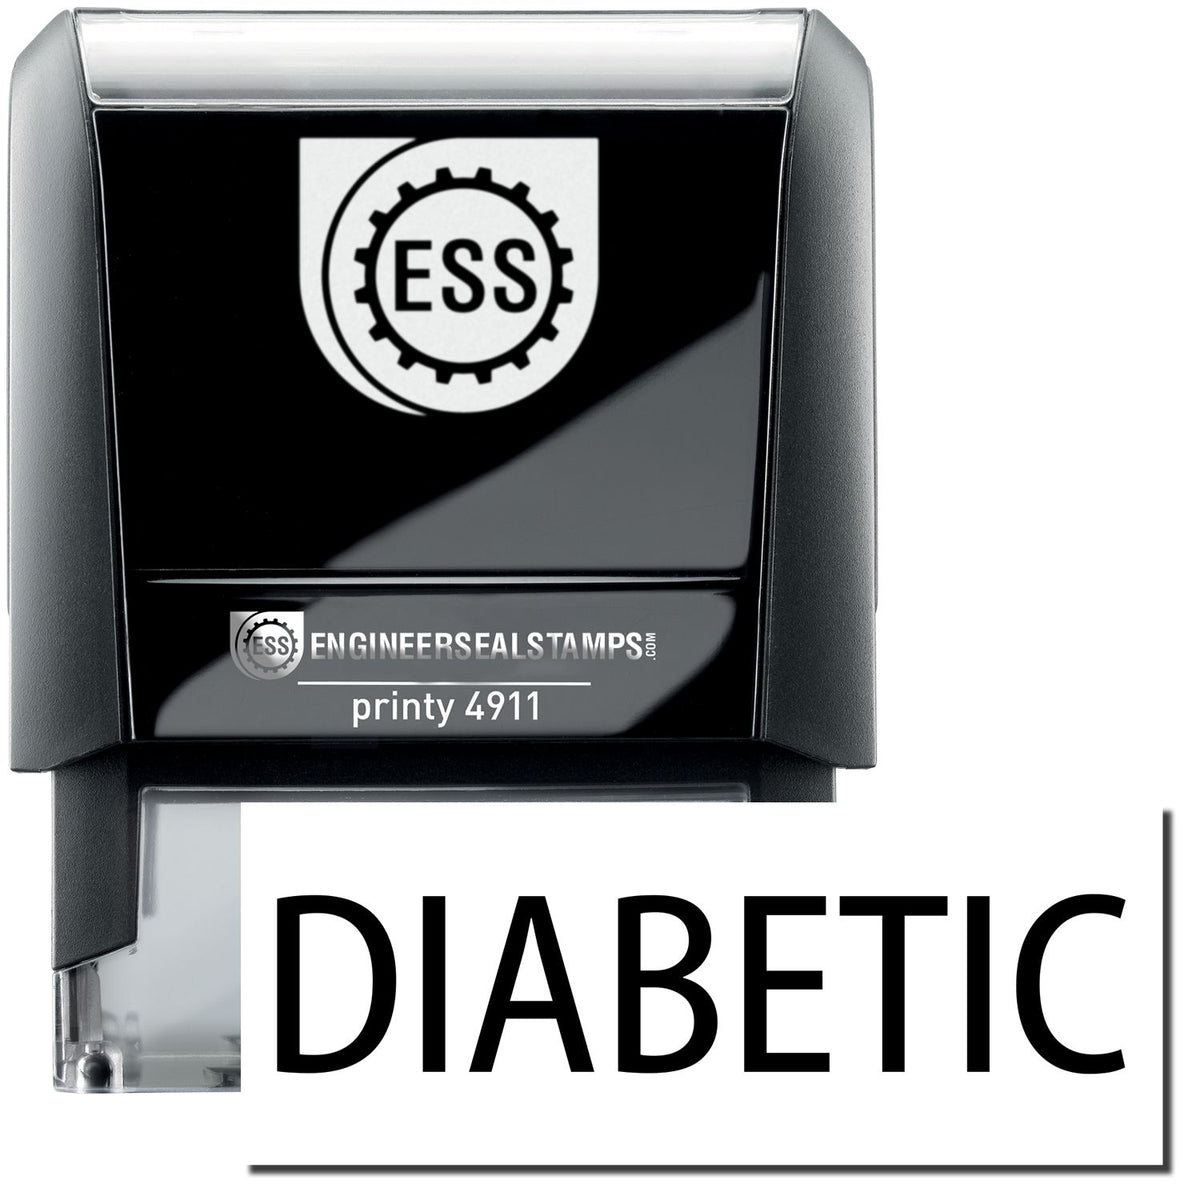 A self-inking stamp with a stamped image showing how the text &quot;DIABETIC&quot; is displayed after stamping.